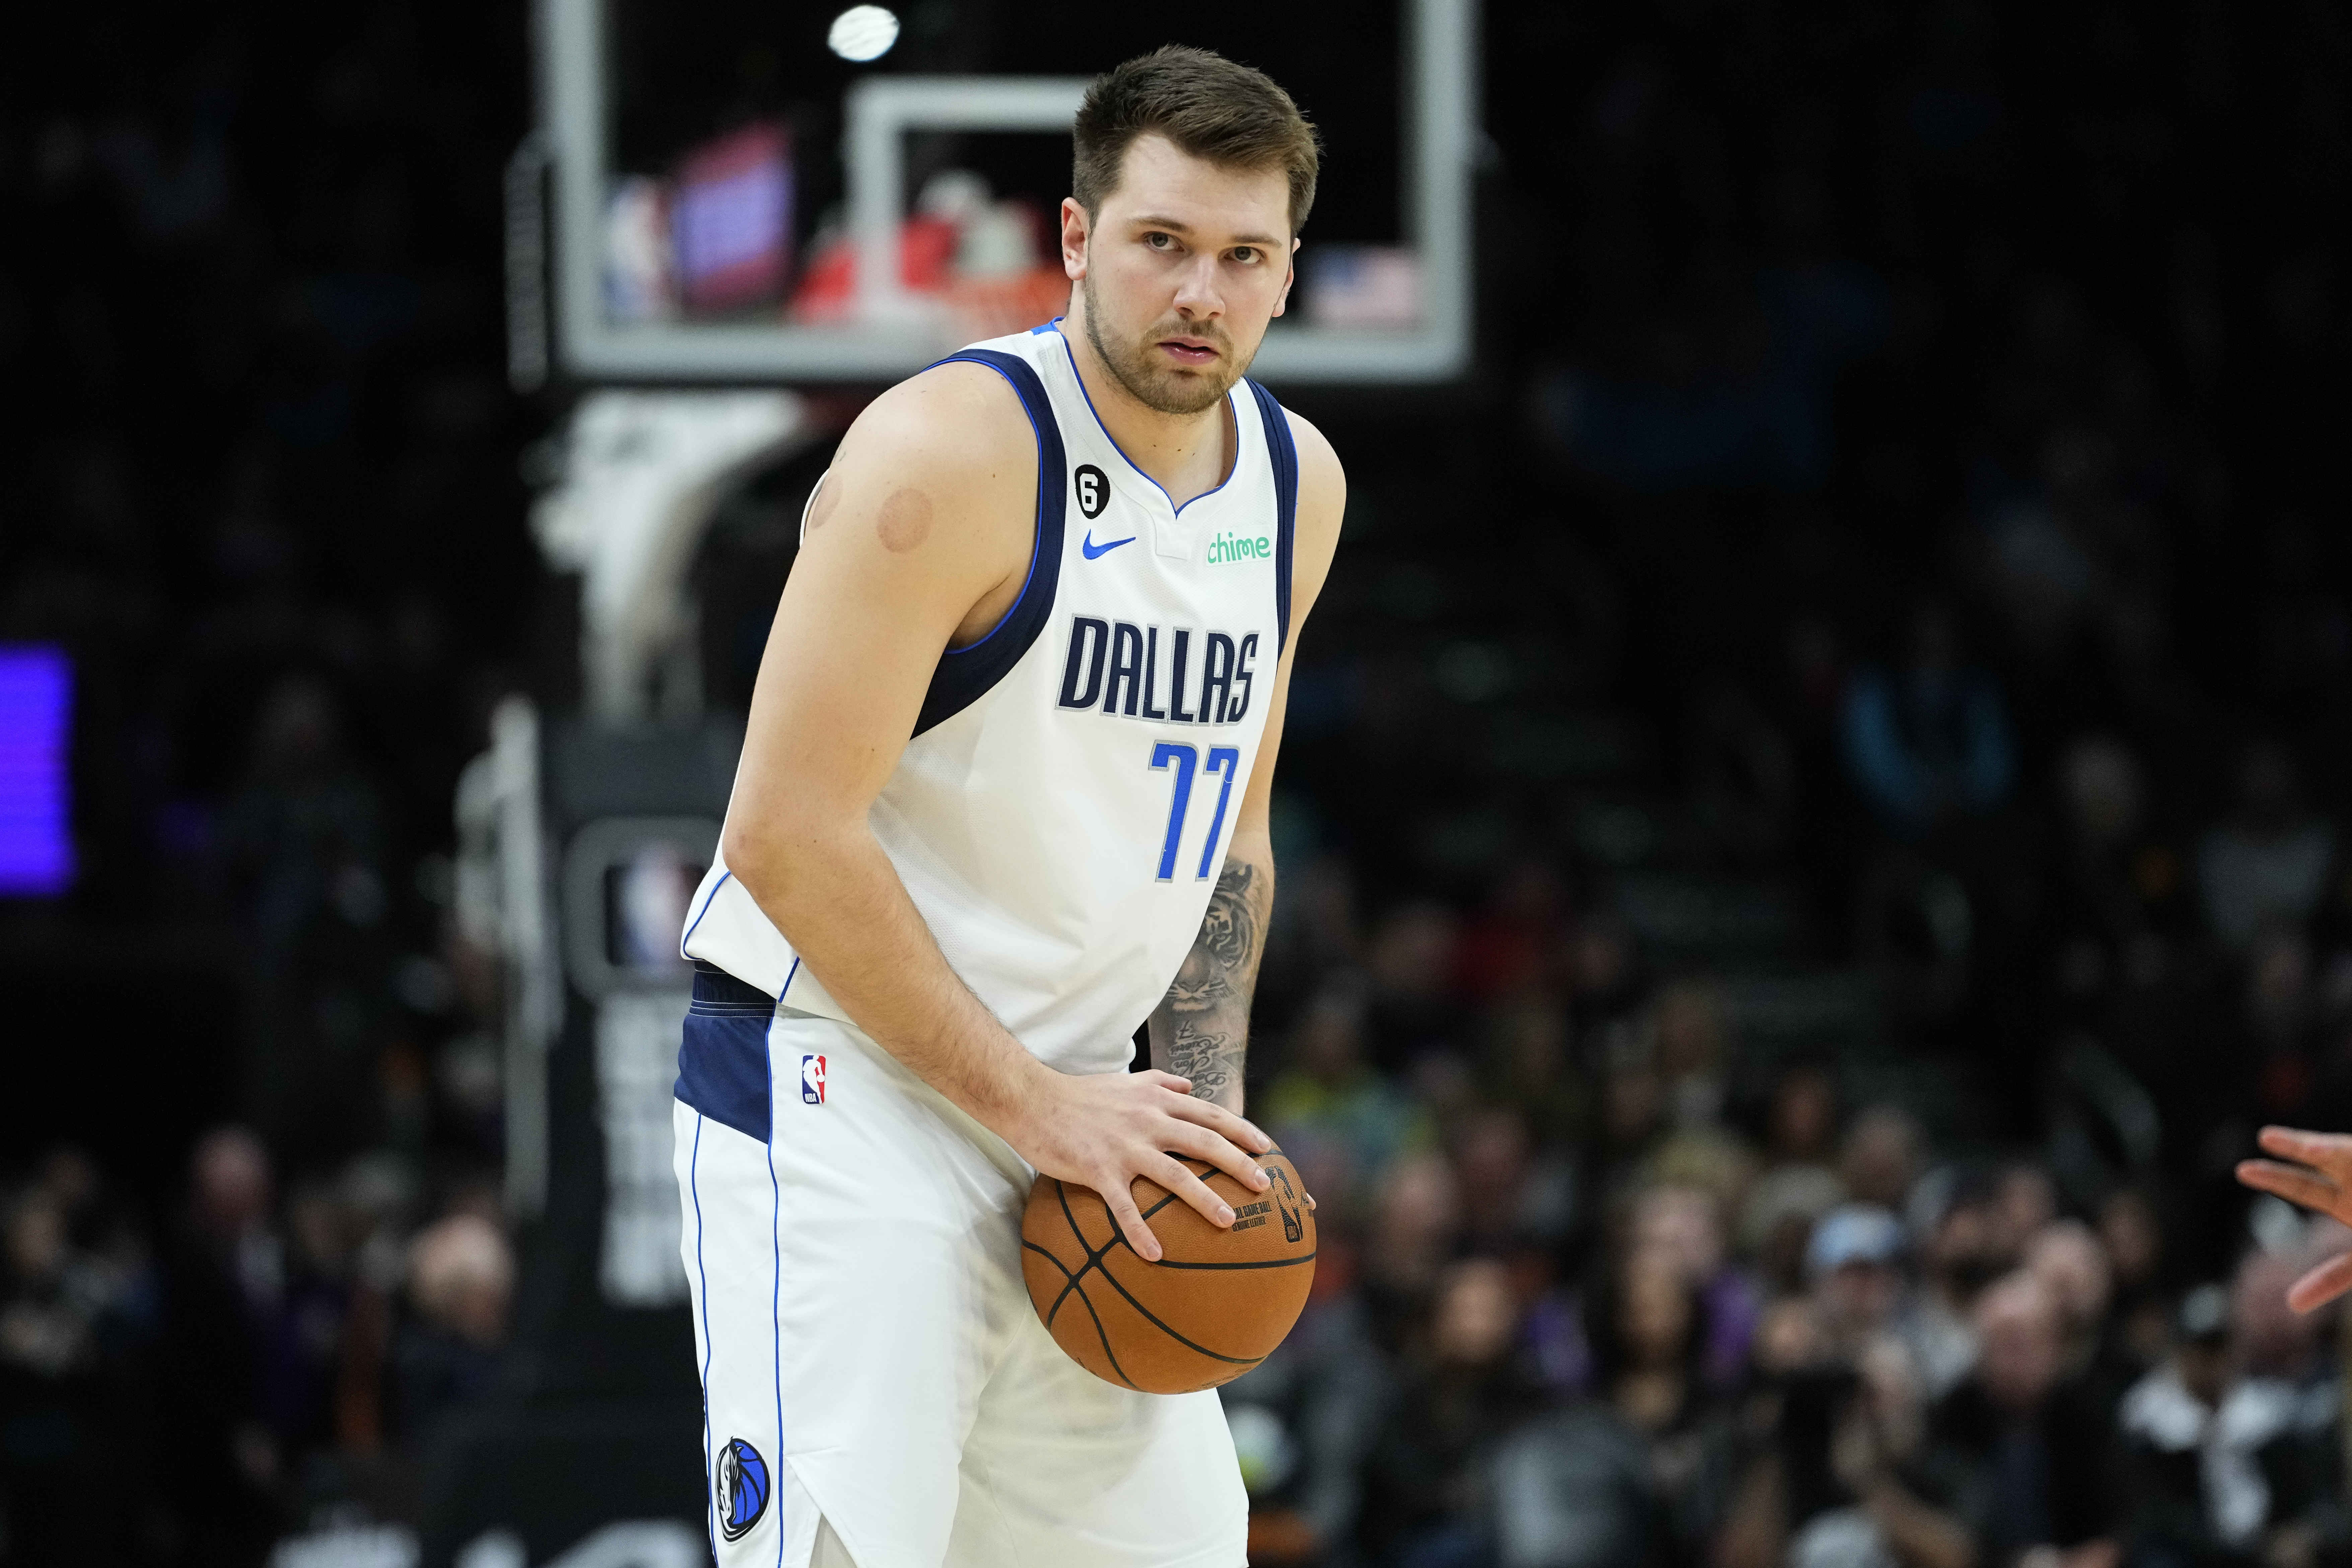 Mavs star Doncic injures heel on fall, out against Pelicans